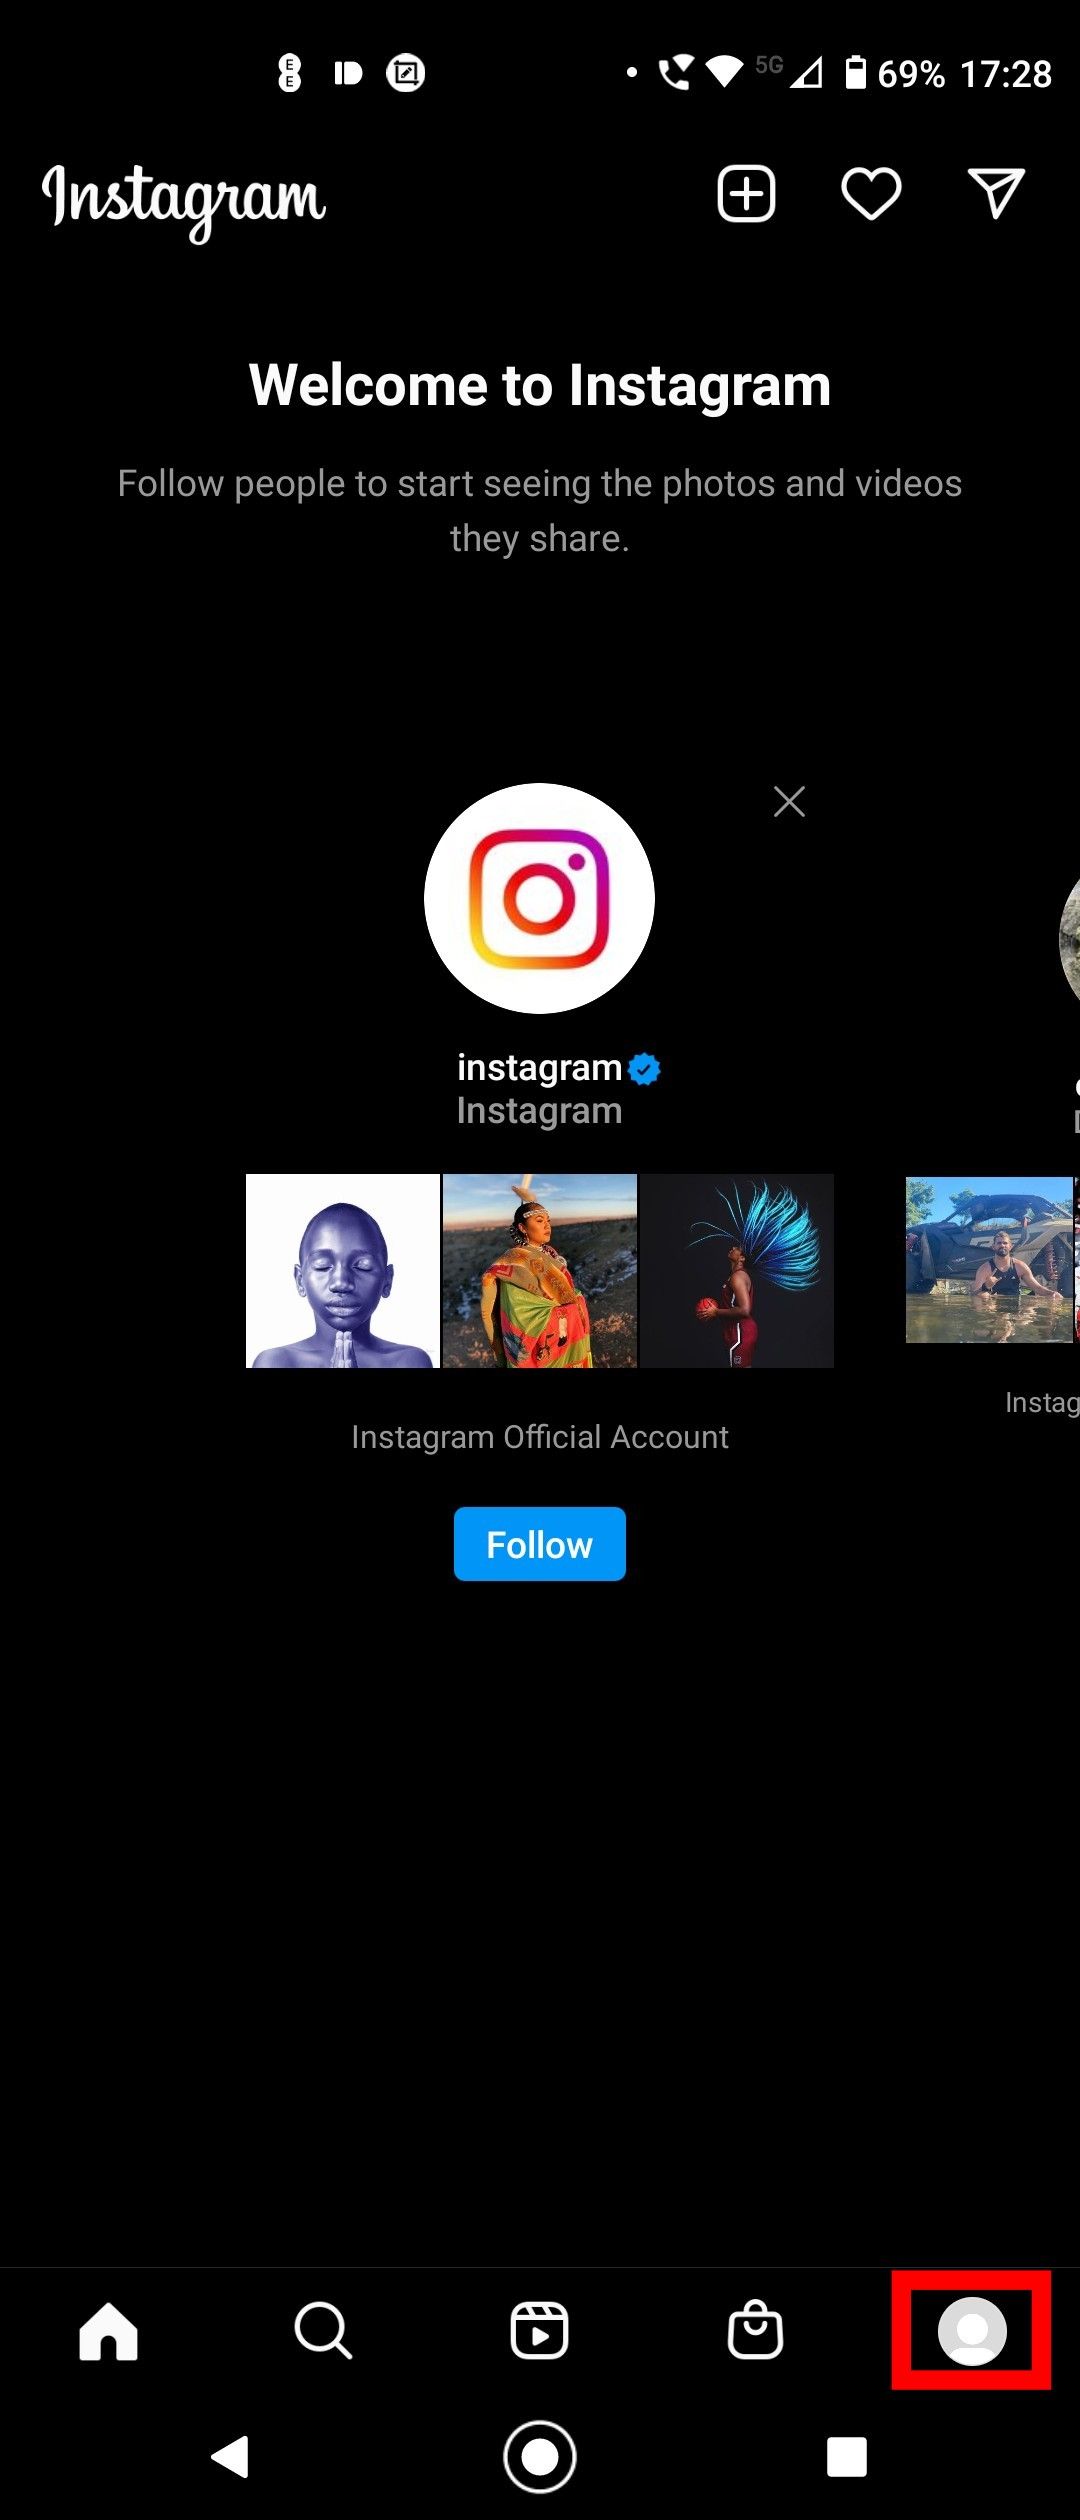 Accessing your profile in the Instagram app